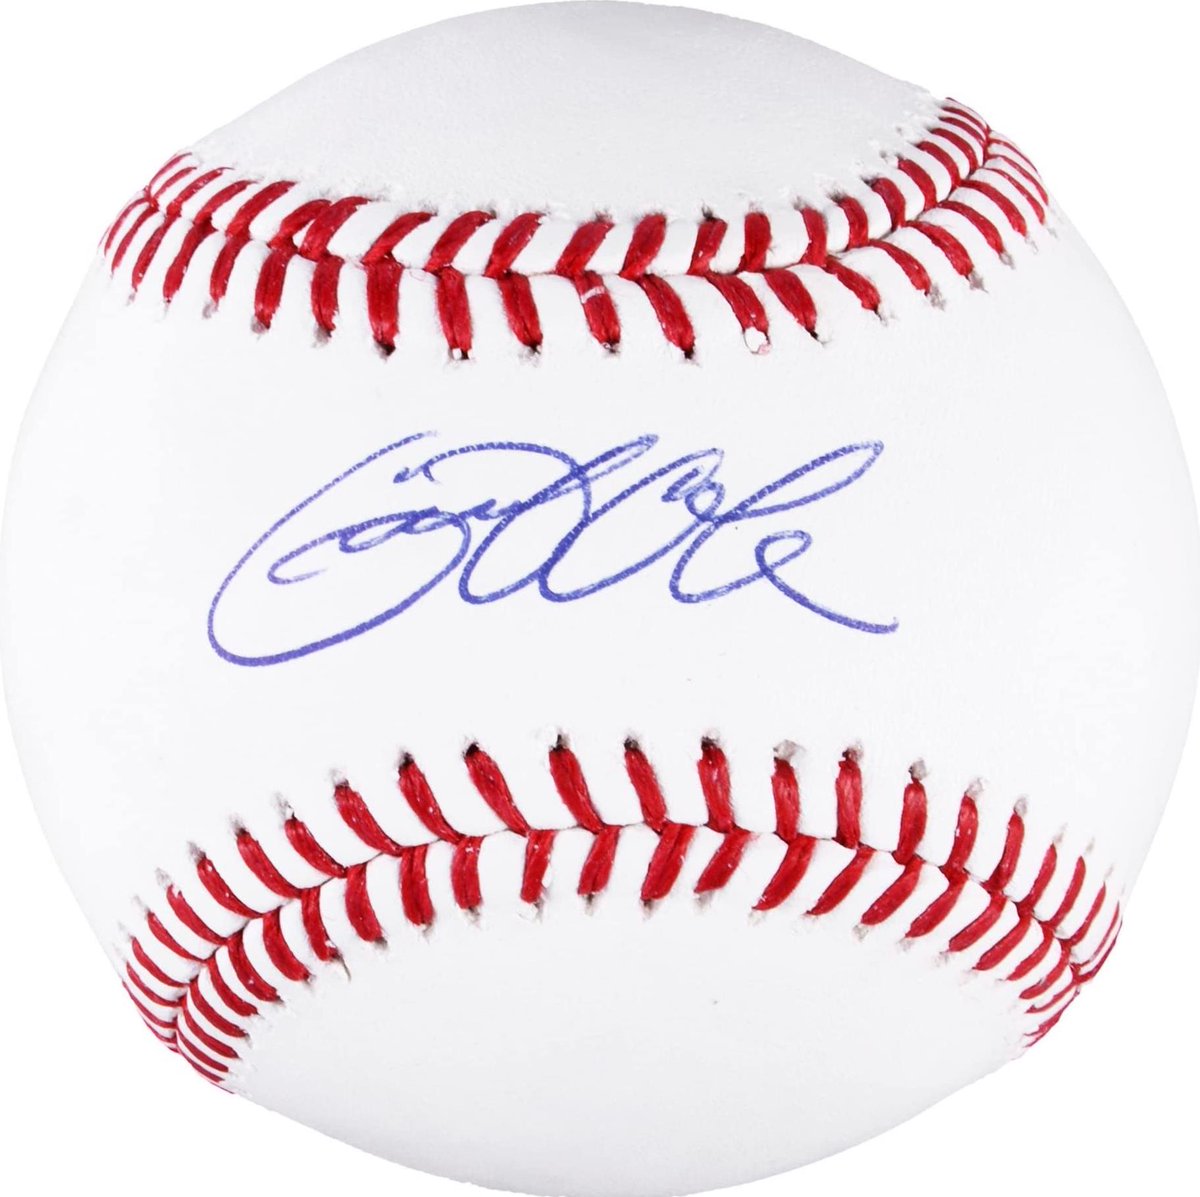 Gerrit Cole New York Yankees Autographed Baseball - Autographed Baseballs RFI8CBL

https://t.co/S6StSGa6uB https://t.co/D46twdipWk